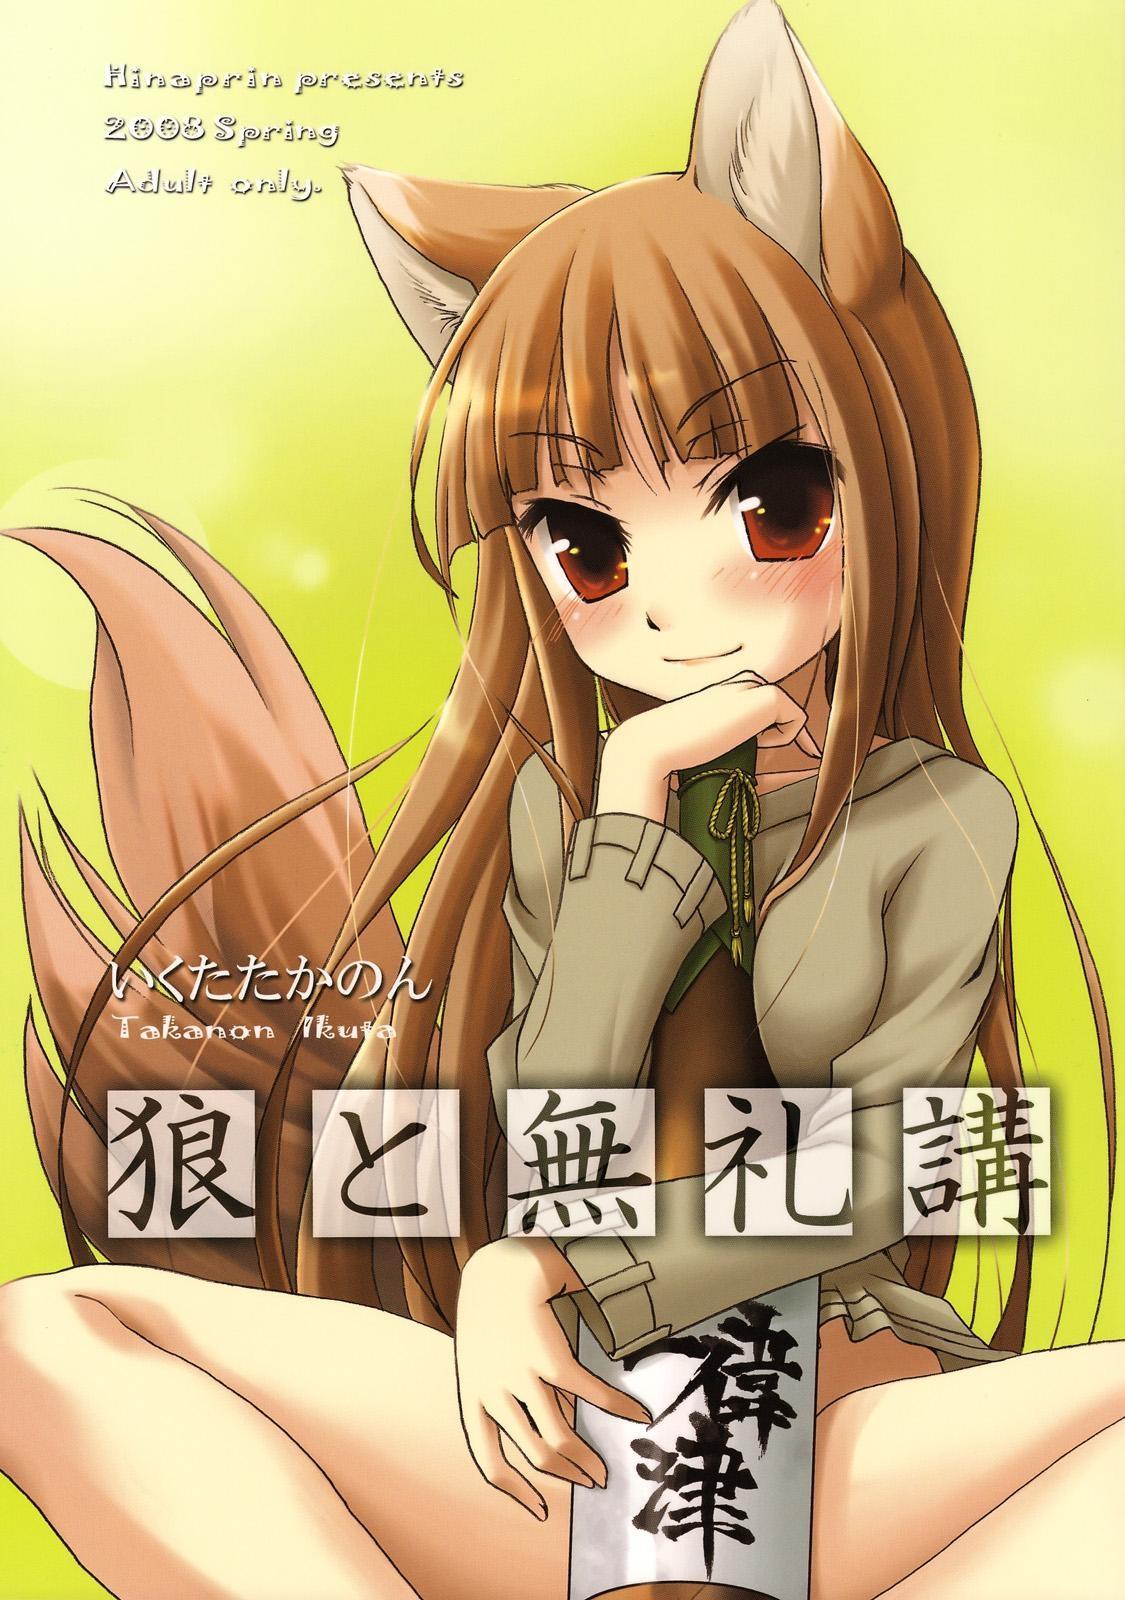 Outdoor Okami to Bureikou - Spice and wolf Girlongirl - Picture 1